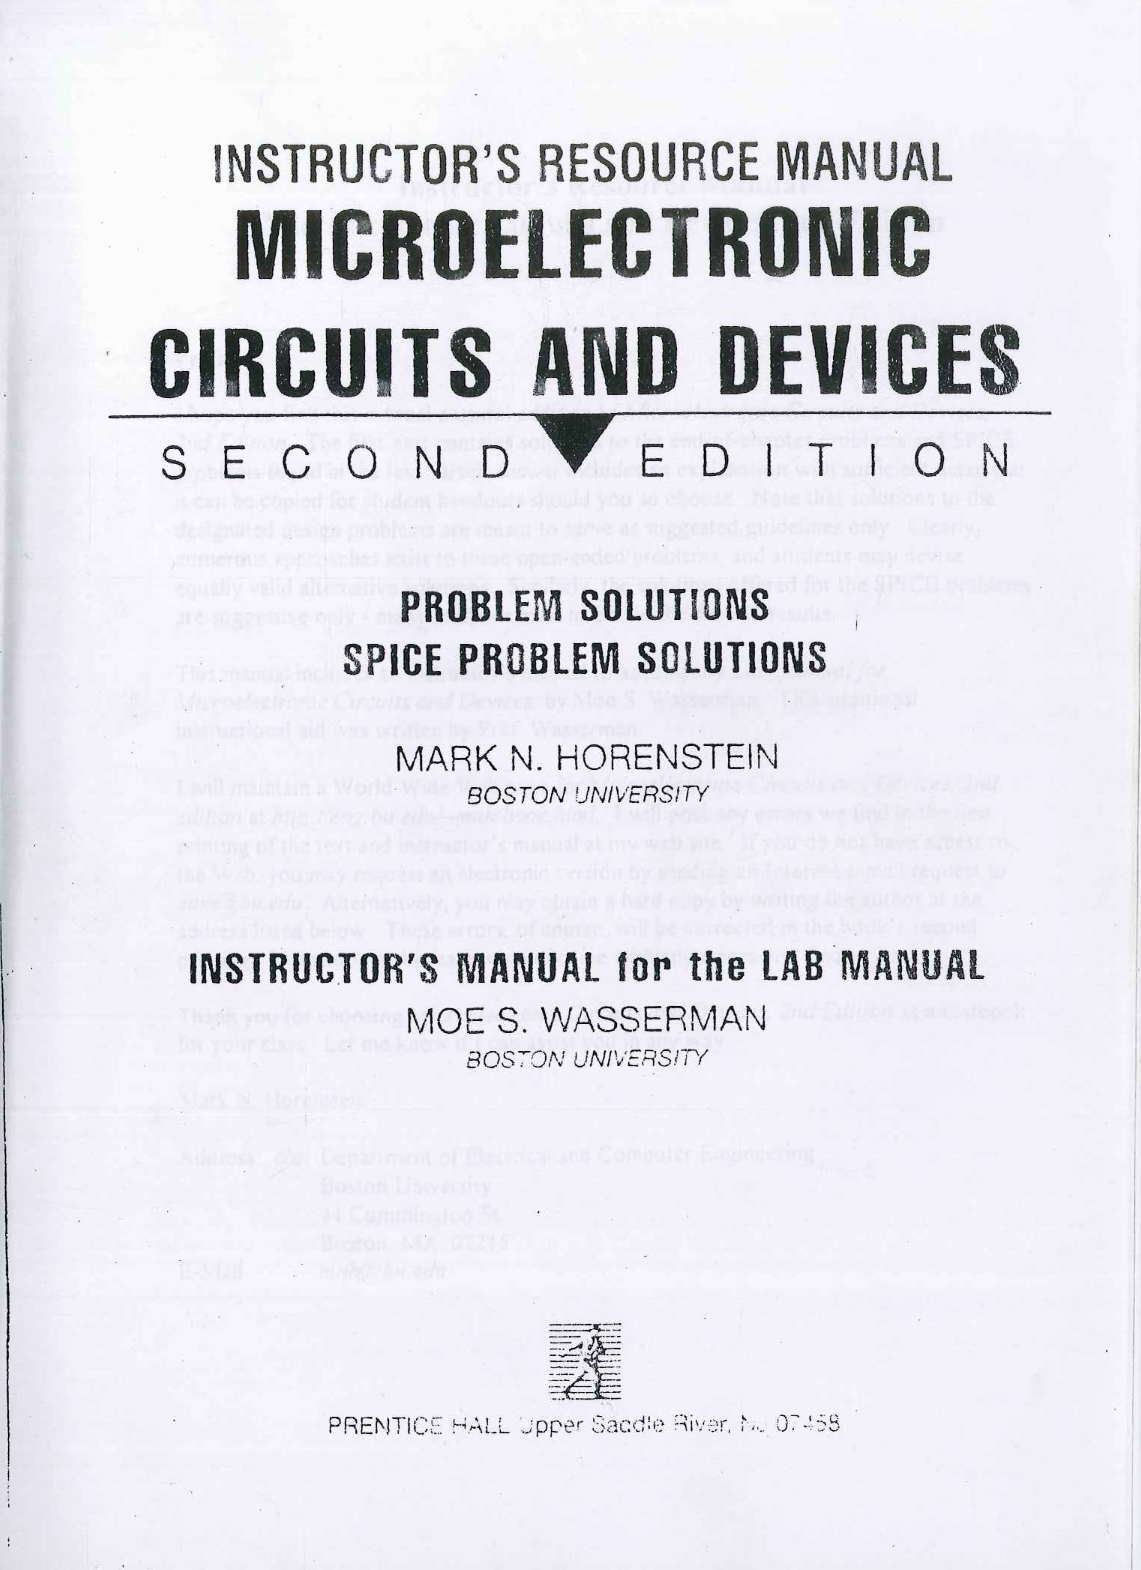 download free Microelectronic Circuits and Devices 2nd edition written by Horenstein Solution Manual eBook in pdf format